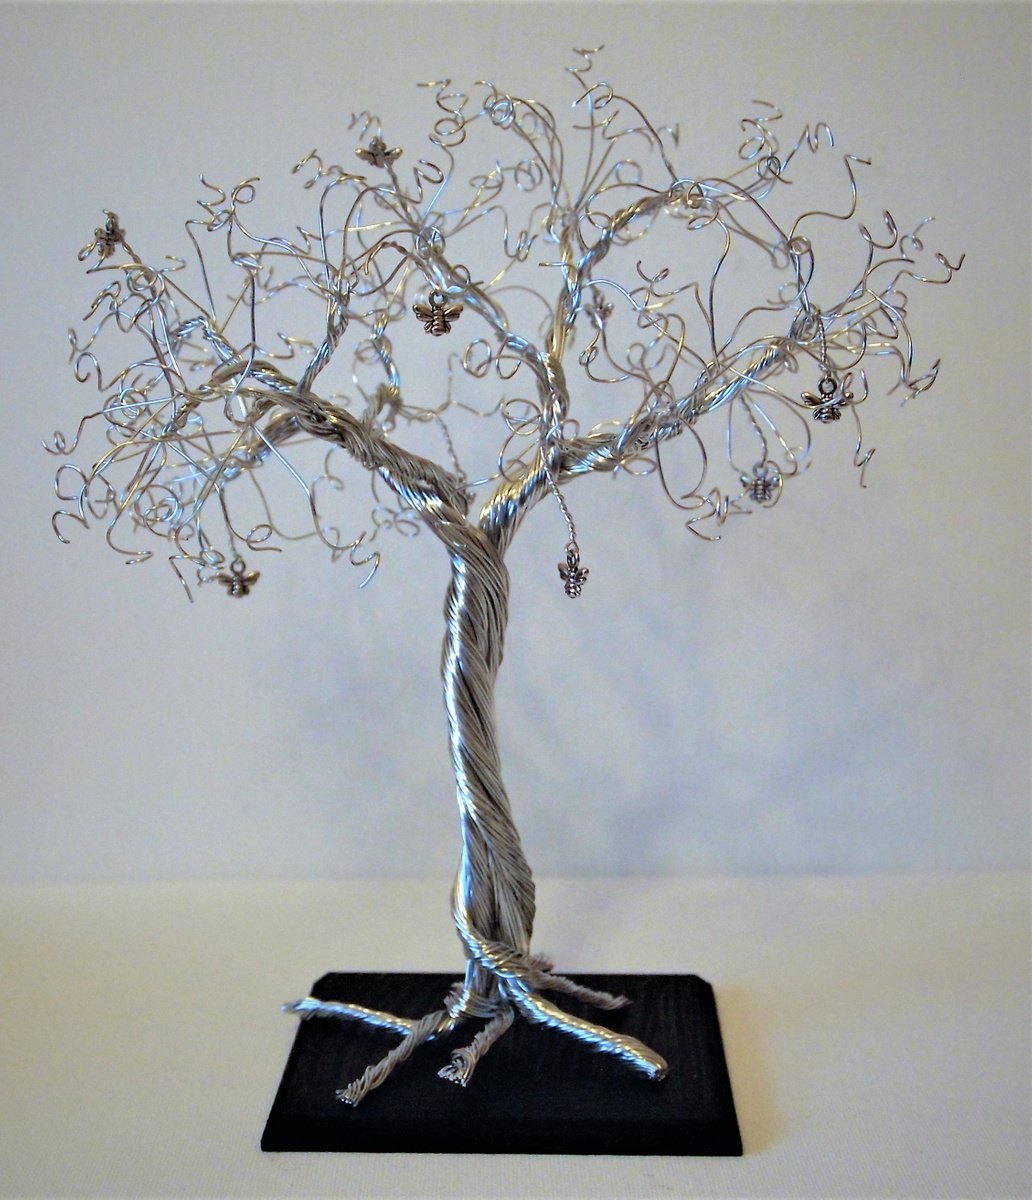 Silver wire tree sculpture with Small Bees by Steph Morgan